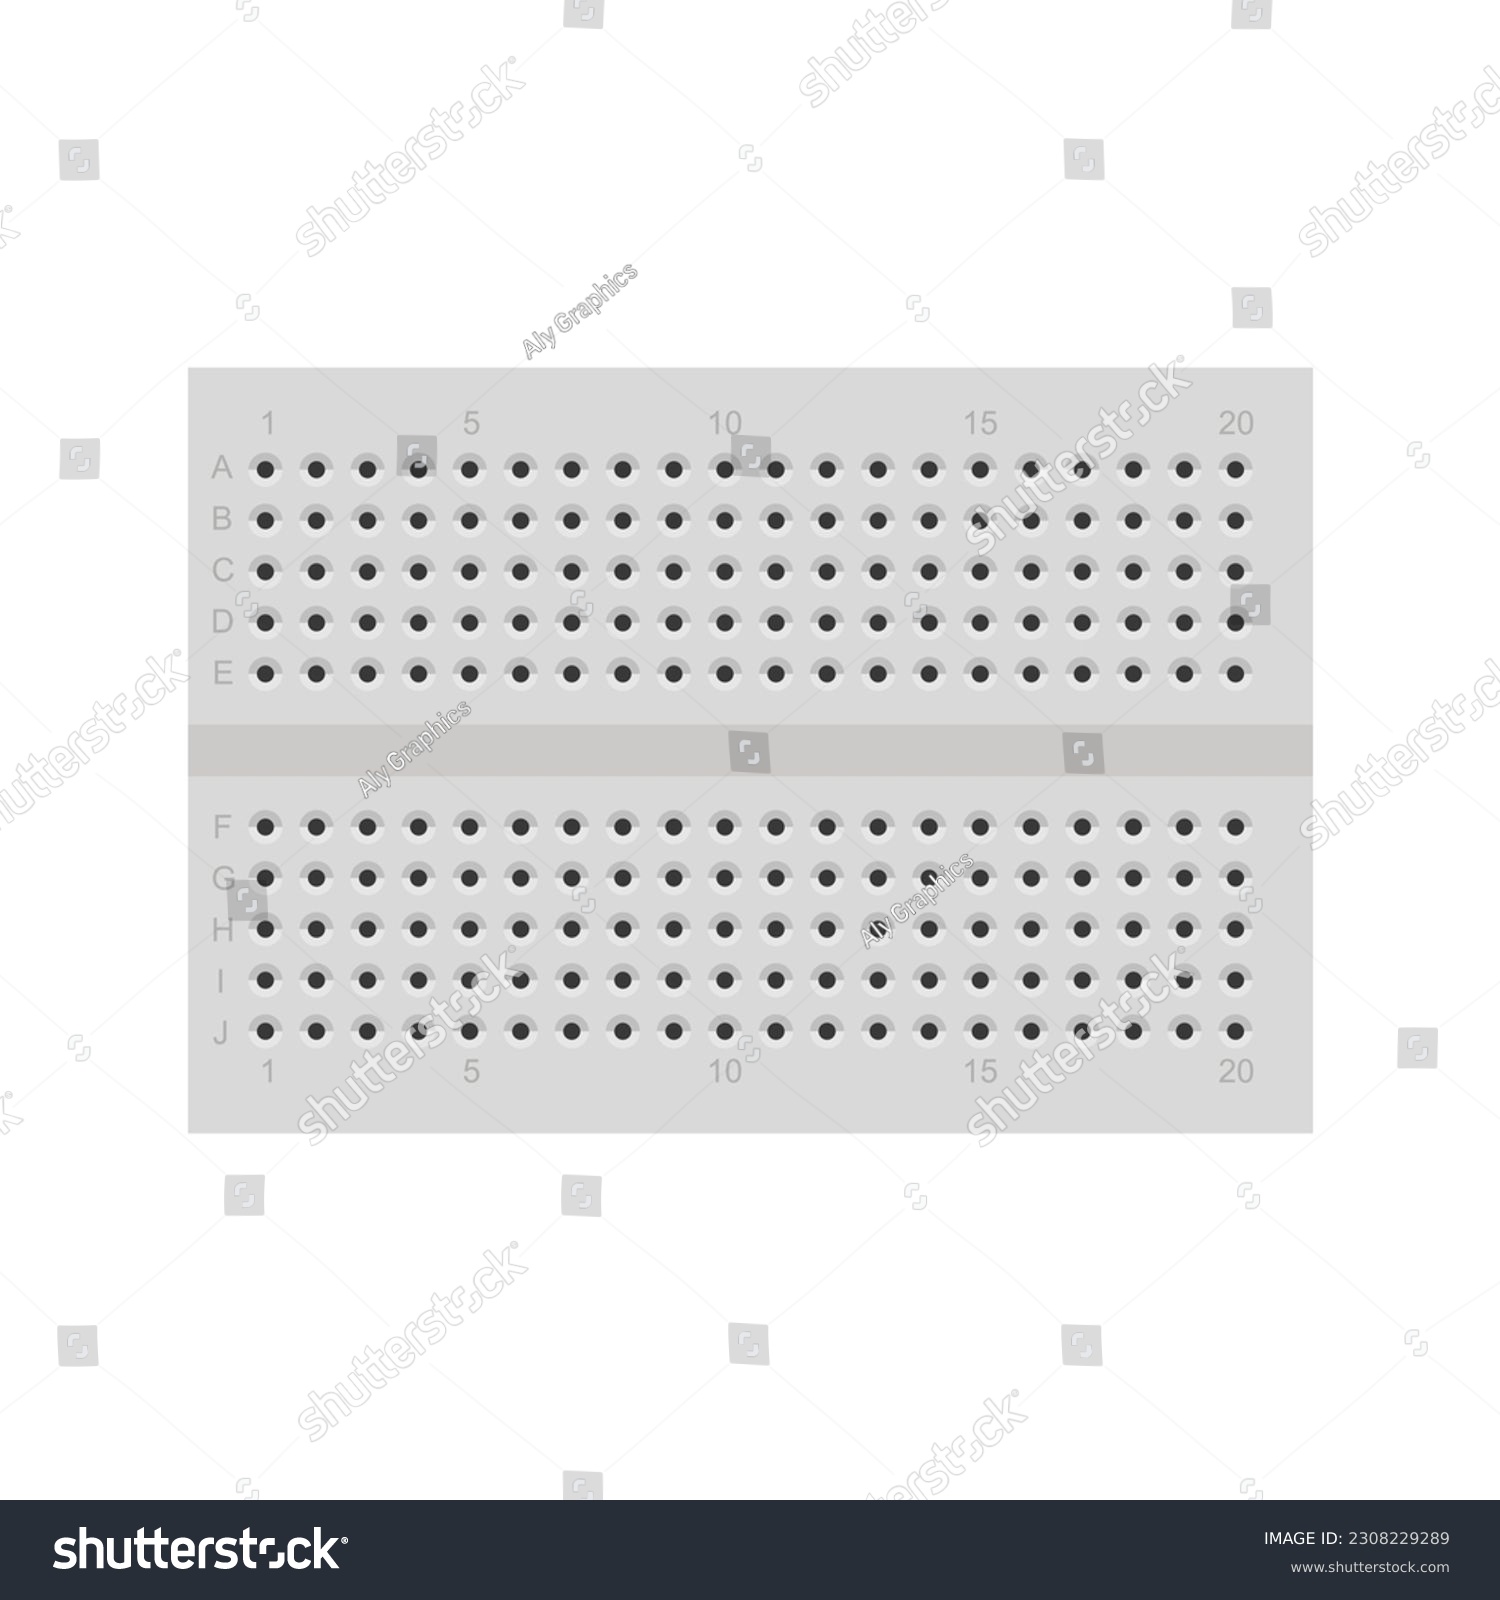 SVG of Tiny Breadboard Vector Illustration - Showcasing the Compact and Versatile Design of a Miniature Breadboard for Prototyping Electronics svg